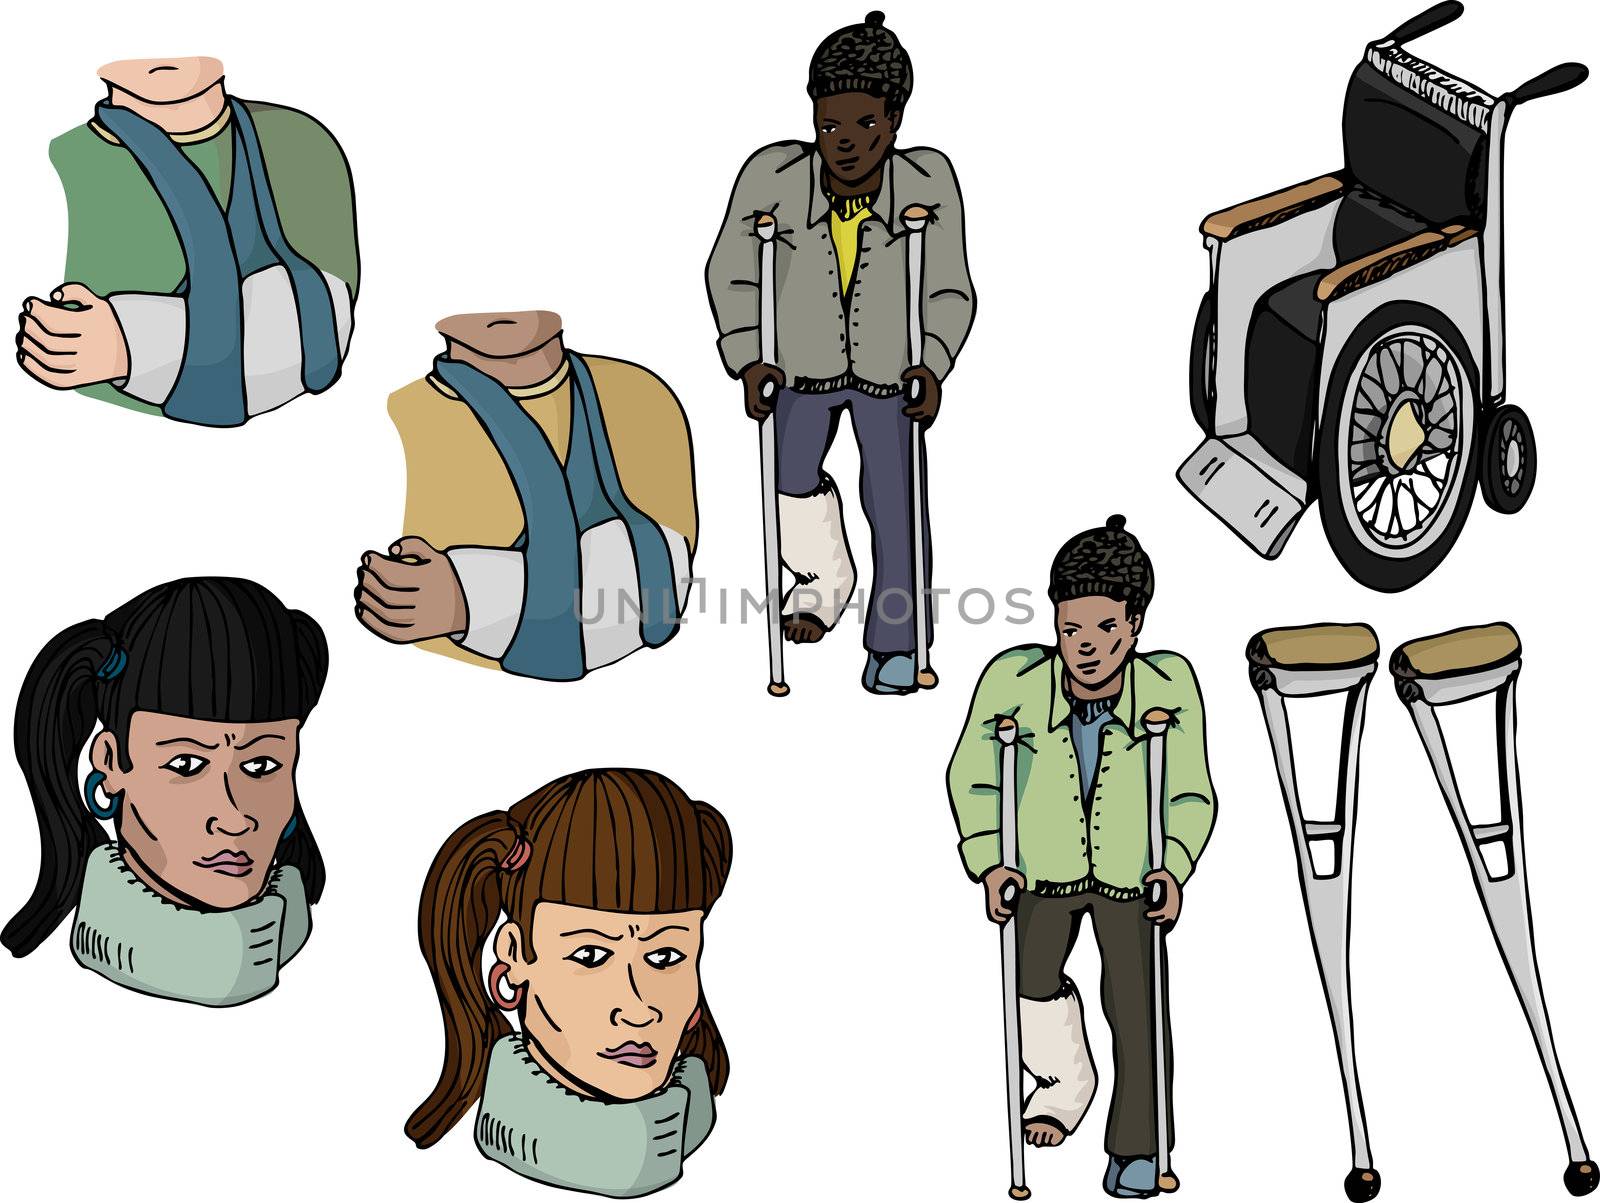 Nine various injury-related illustrations with diverse ethnic representation